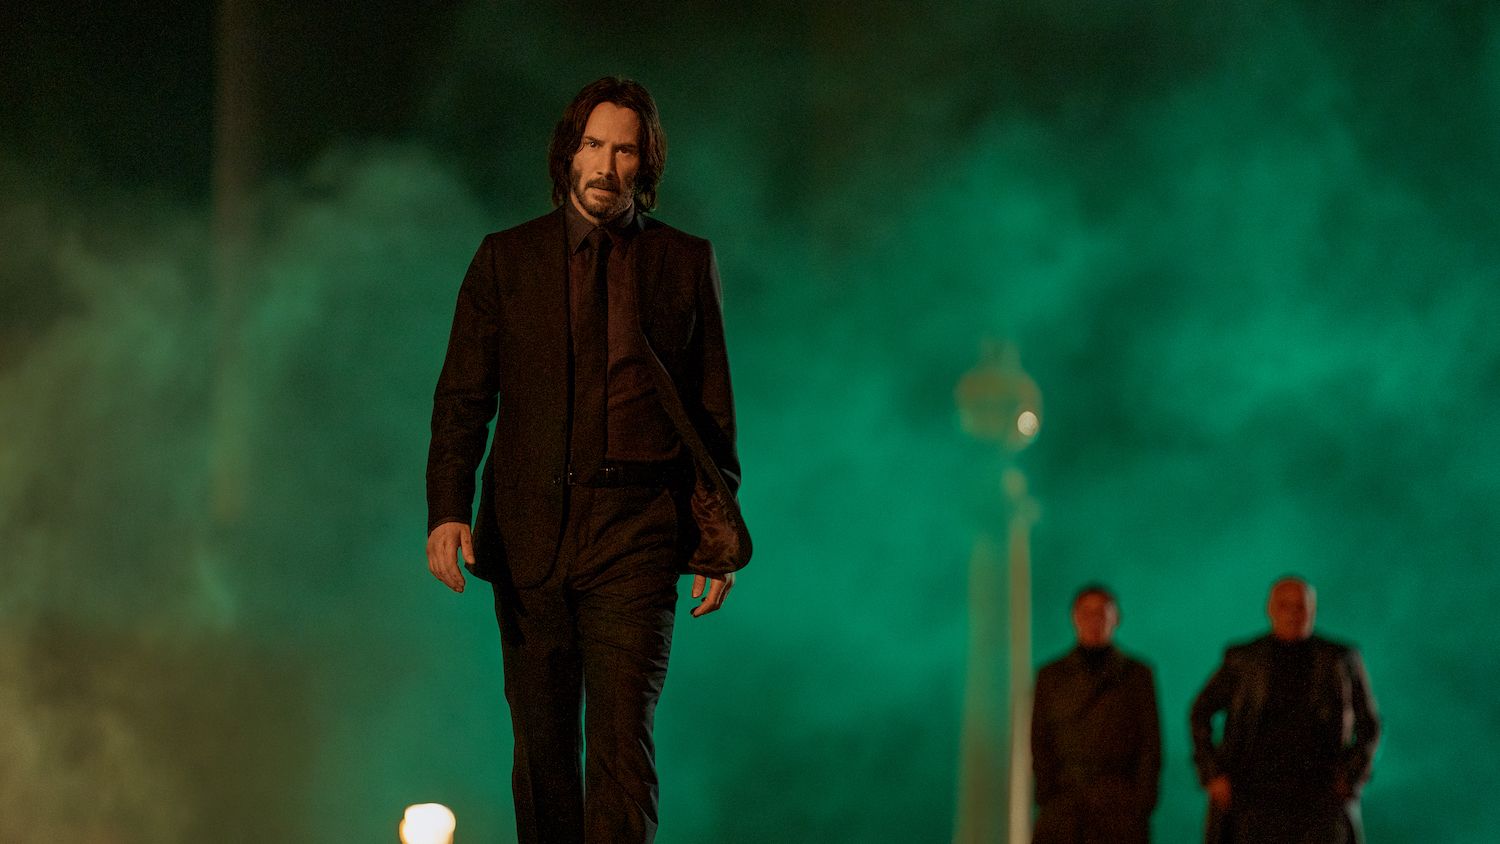 John Wick: Chapter 4 ending and post-credits scene, explained: What's next?